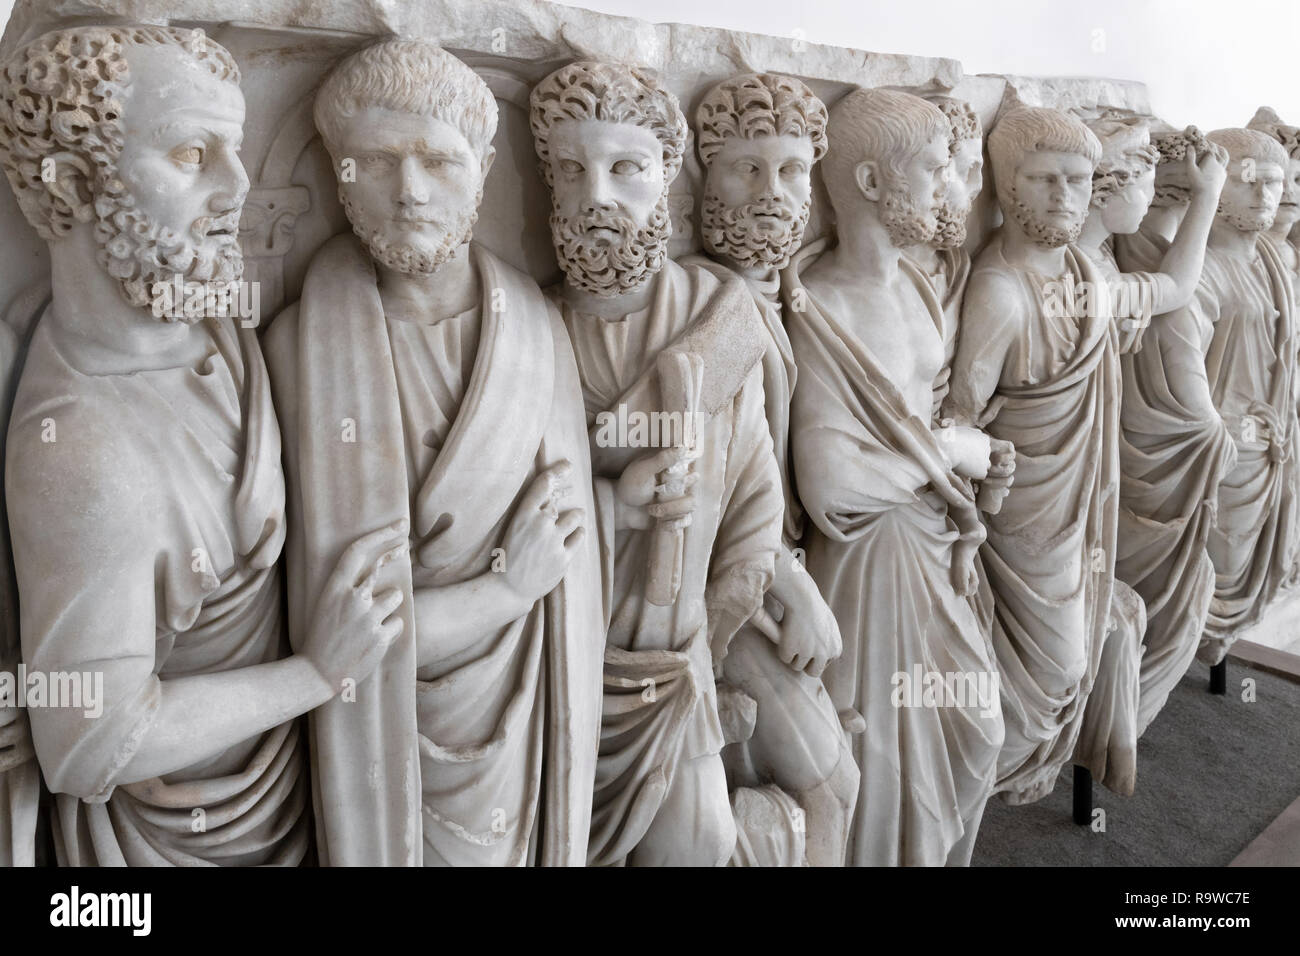 A Roman sarcophagus of the   3rd cen. AD, depicting men in traditional Roman dress, the toga,  In the National Archaeological Museum at Naples, Italy. Stock Photo